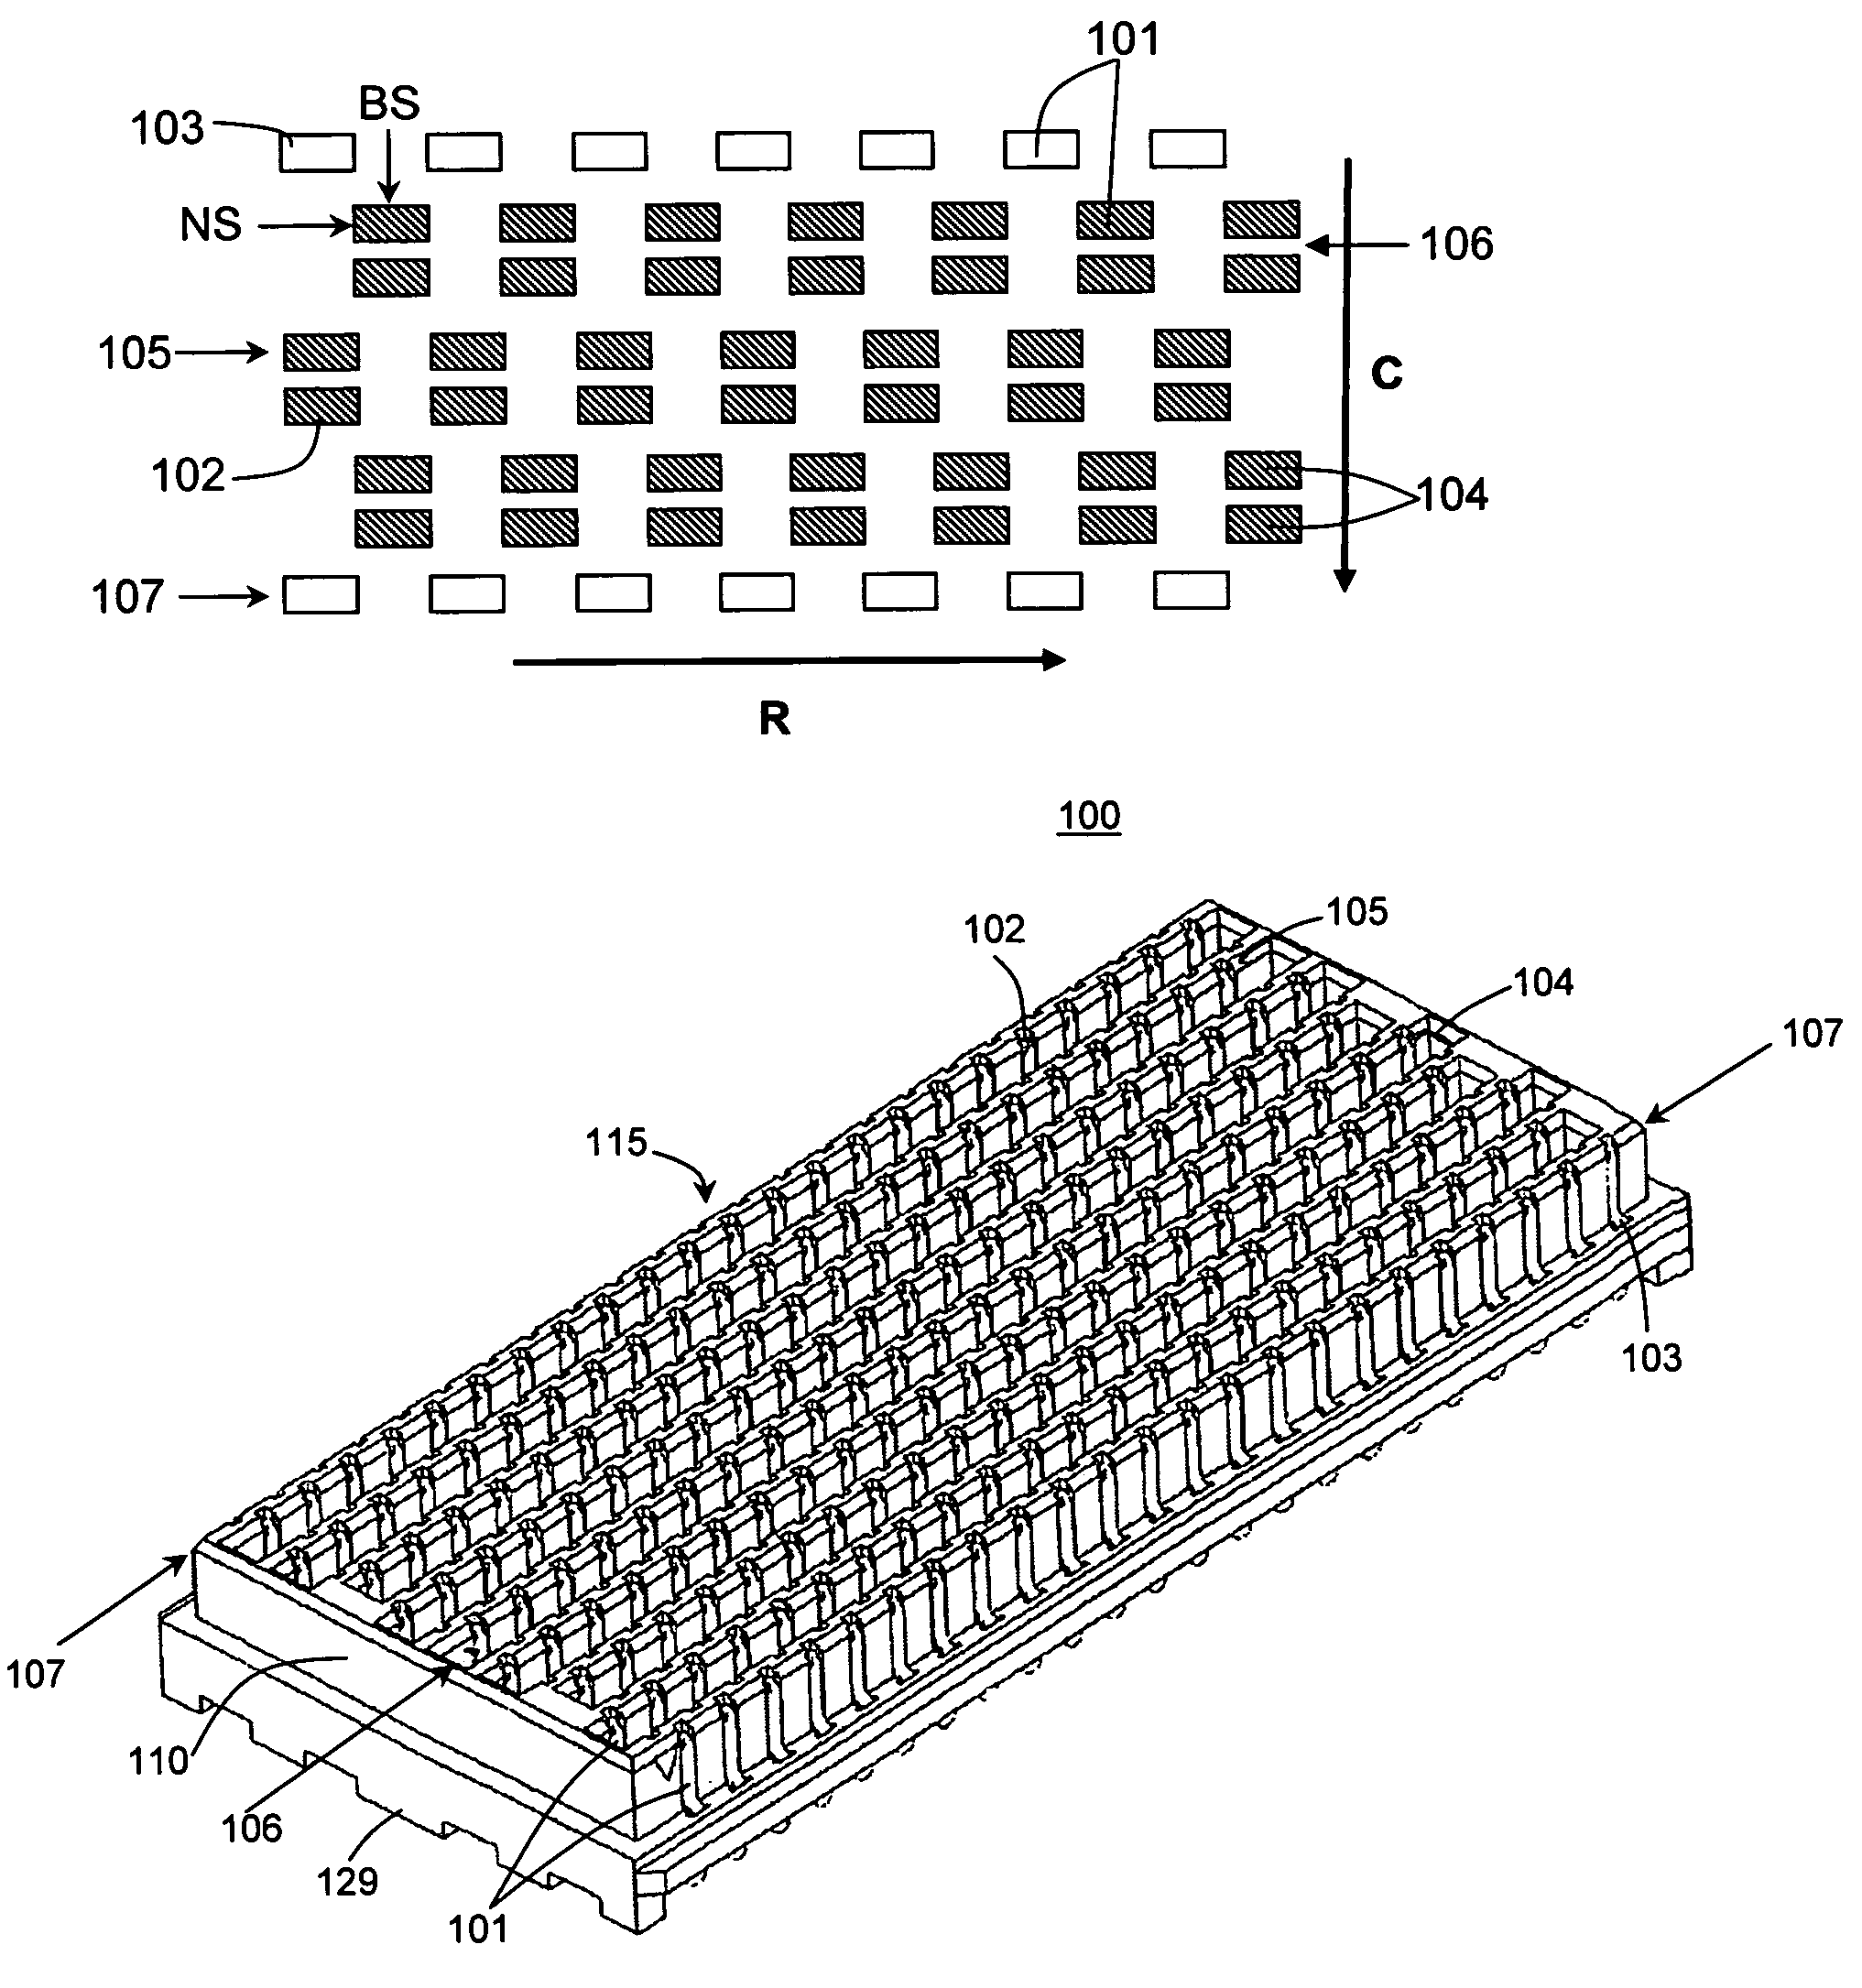 Array connector having improved electrical characteristics and increased signal pins with decreased ground pins